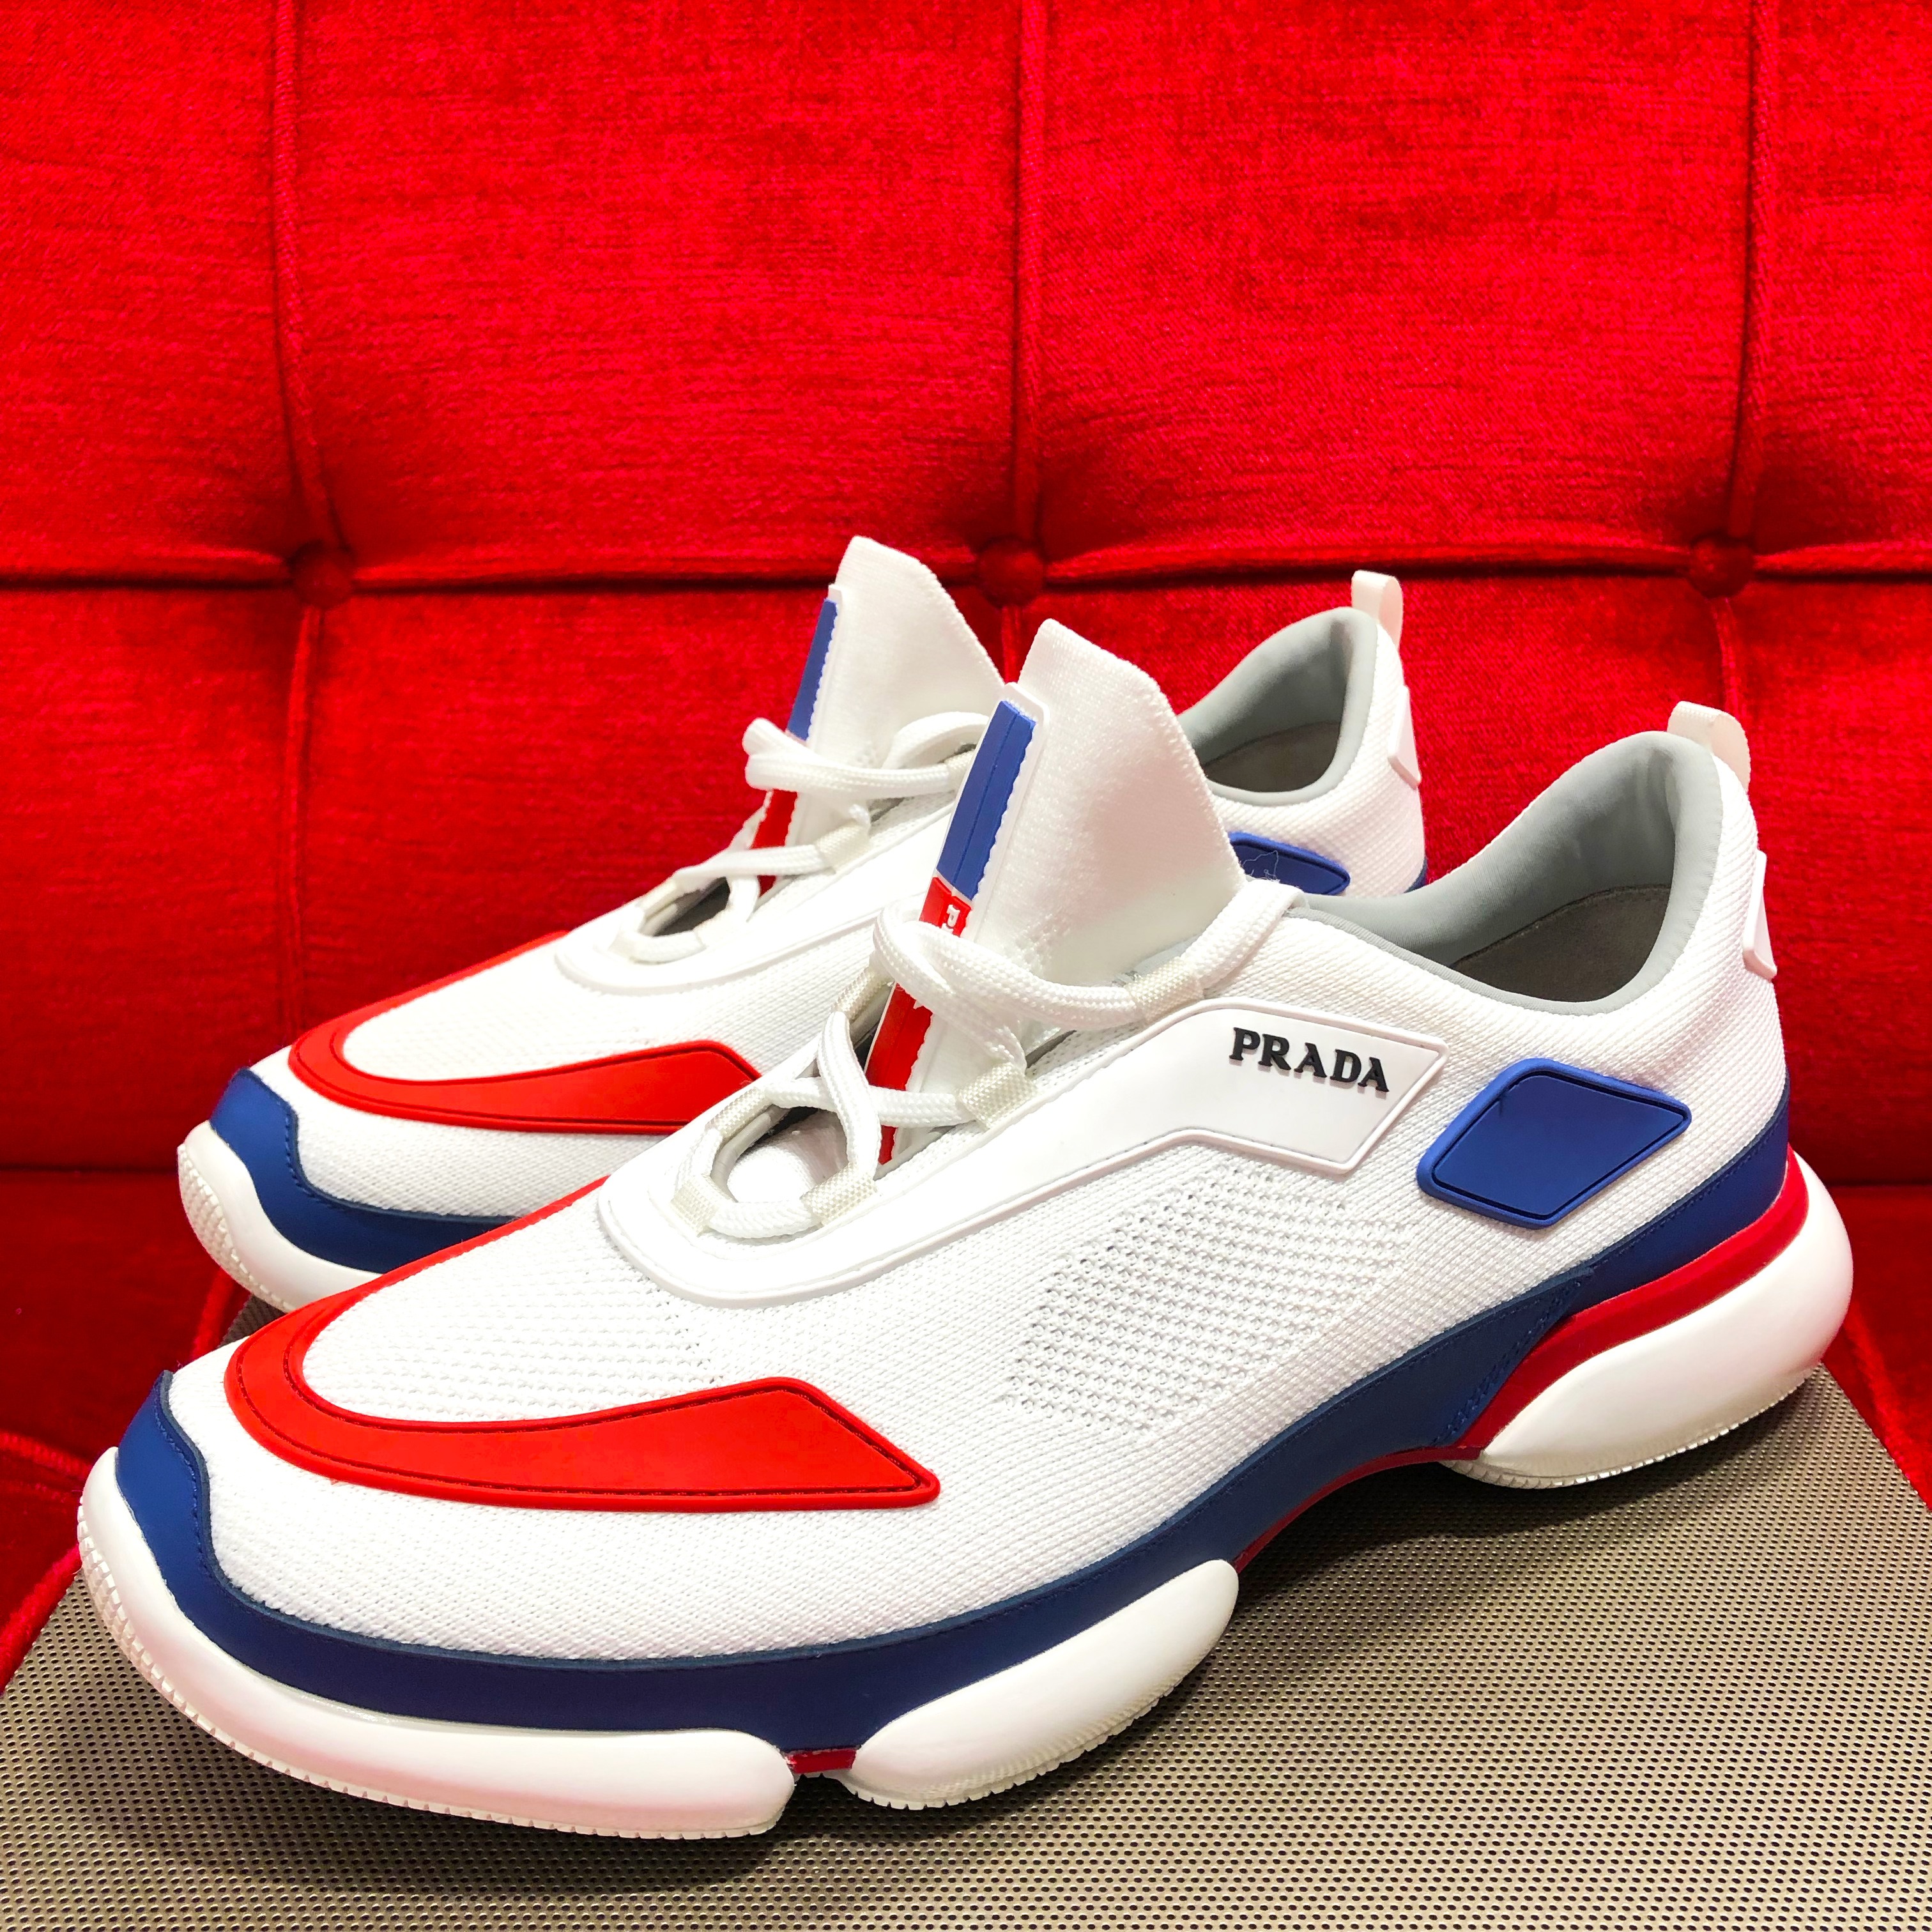 Prada knit fabric Cloudbust sneakers in white and red and blue accents